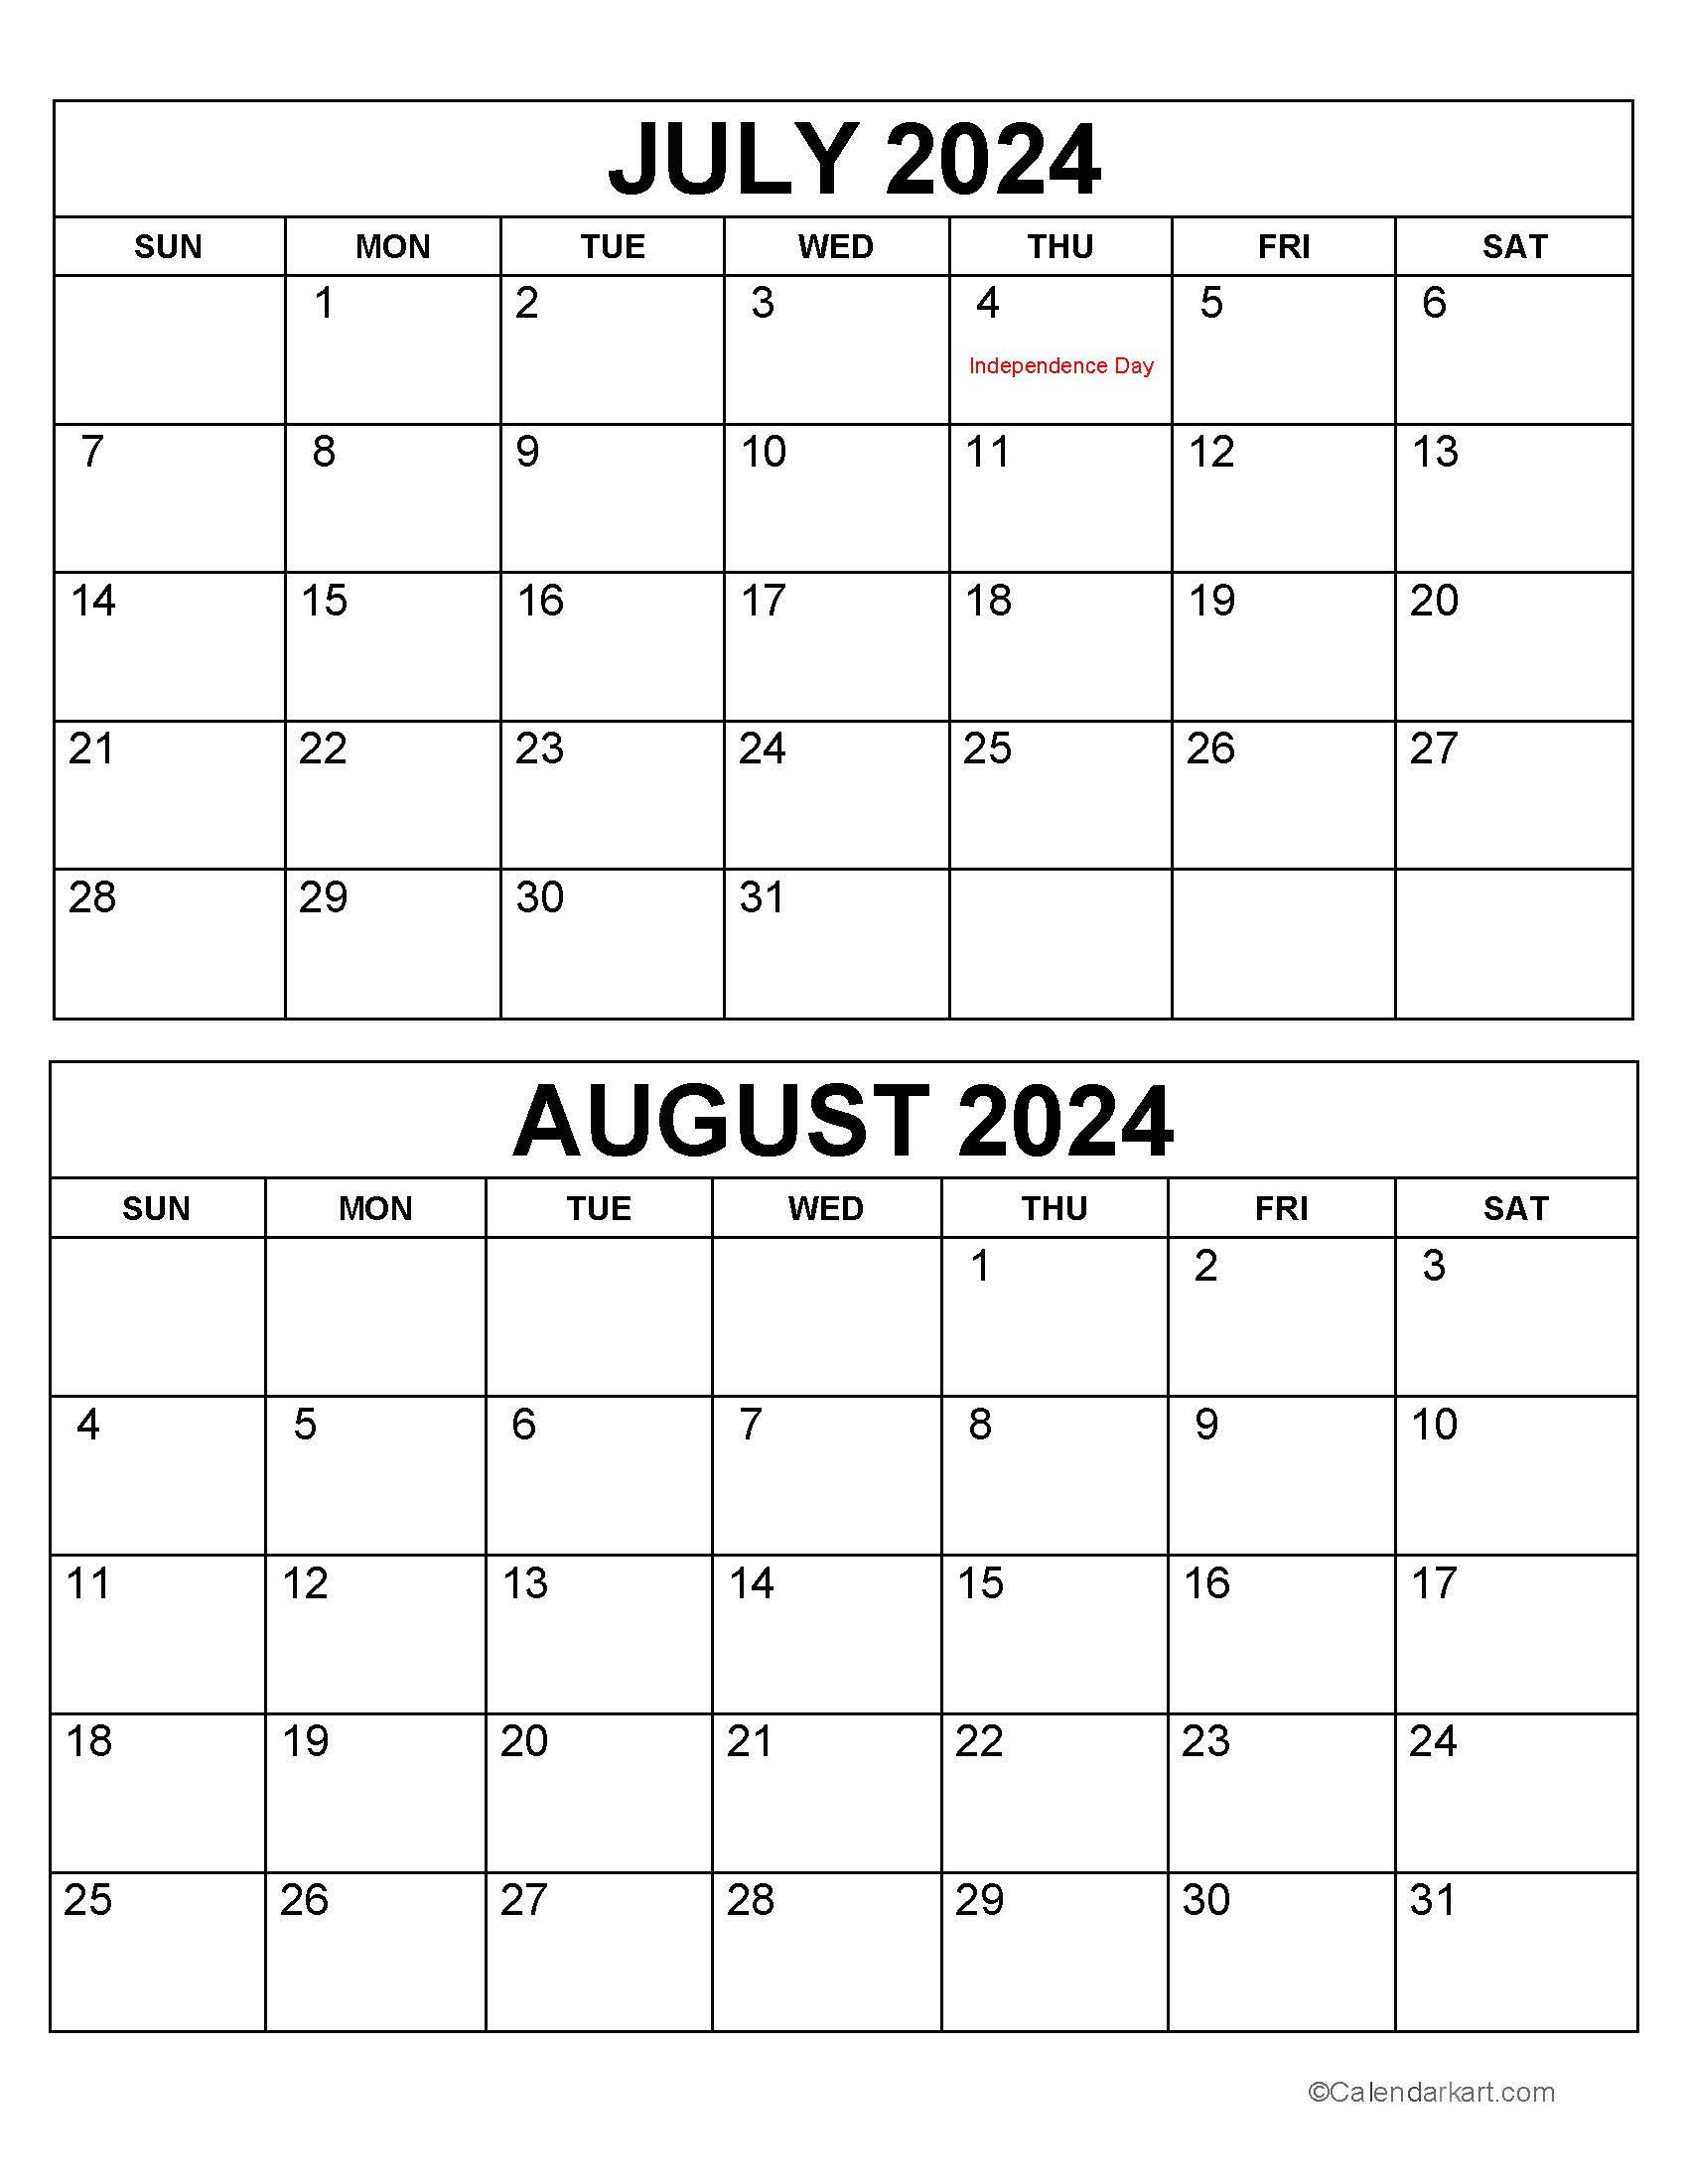 Printable July August 2024 Calendar | Calendarkart with regard to Calendar Before July and August 2024